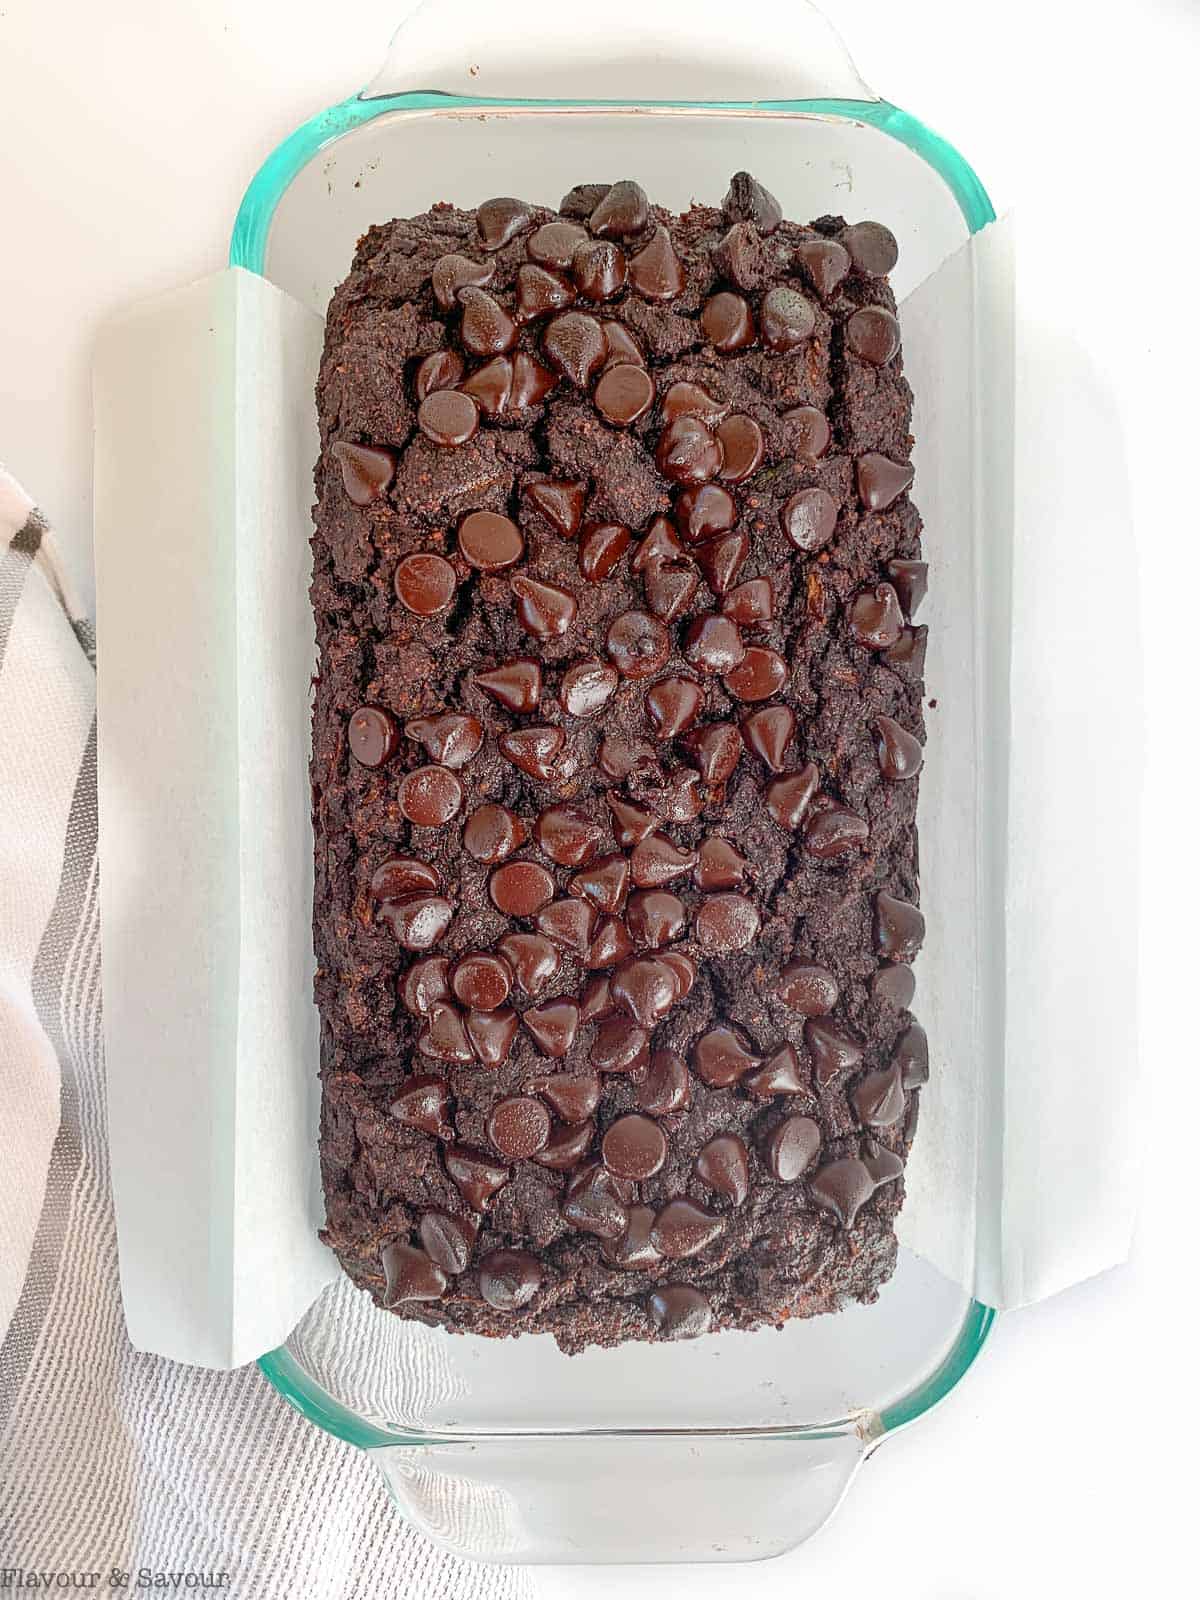 Baked double chocolate zucchini bread in a lined loaf pan